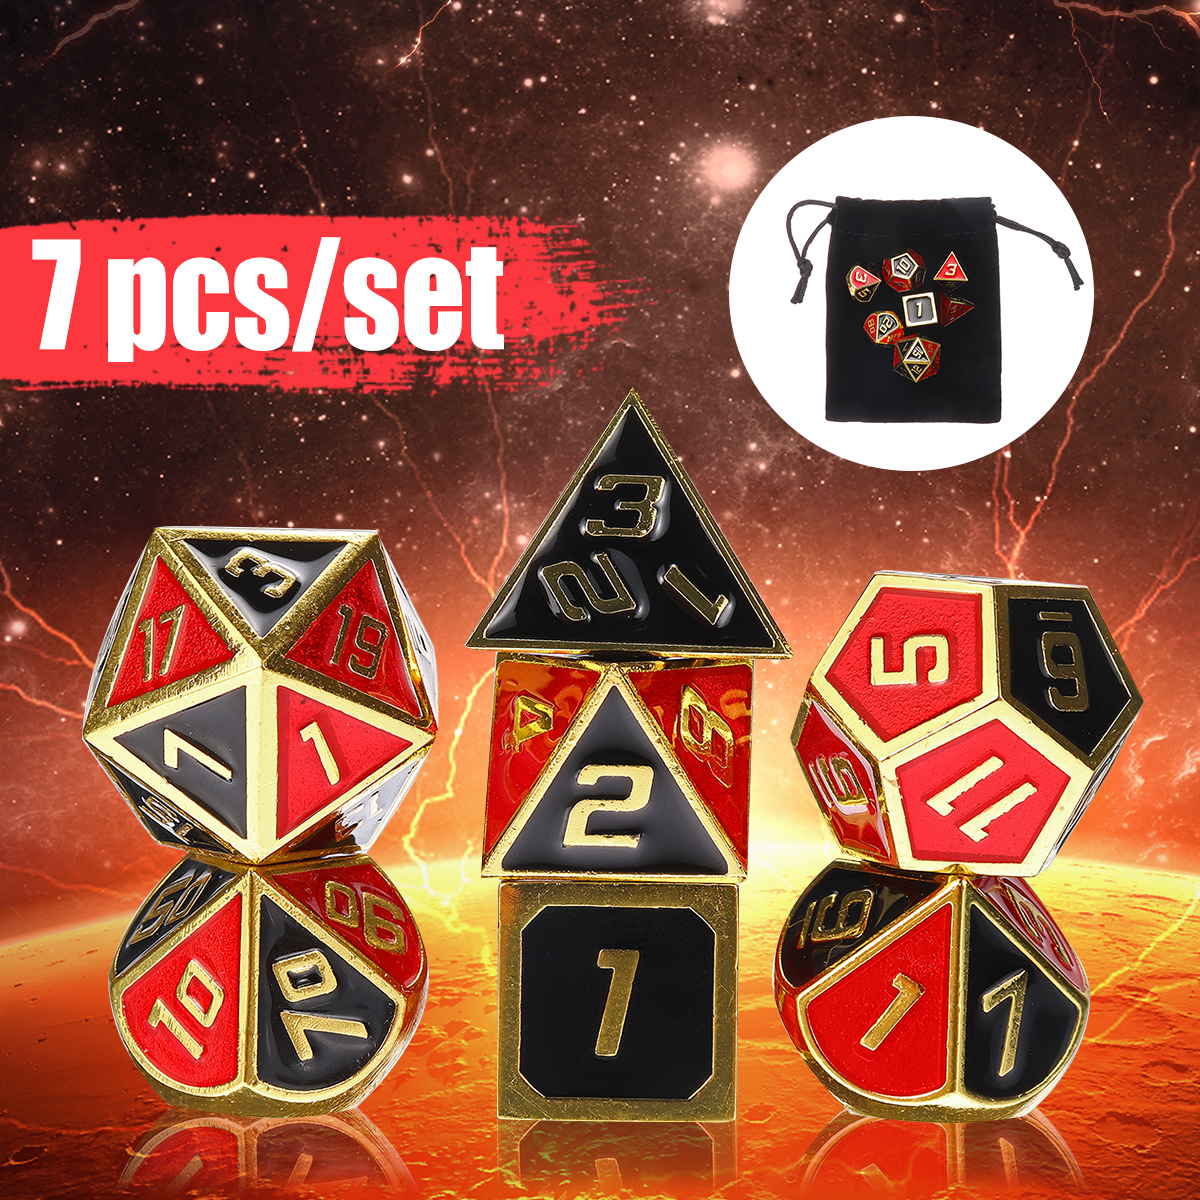 7Pcs-Metal-Polyhedral-Dices-Set-Role-Playing-D--D-Dungeons-and-Dragons-Dice-Party-Table-Games-with-C-1587884-2